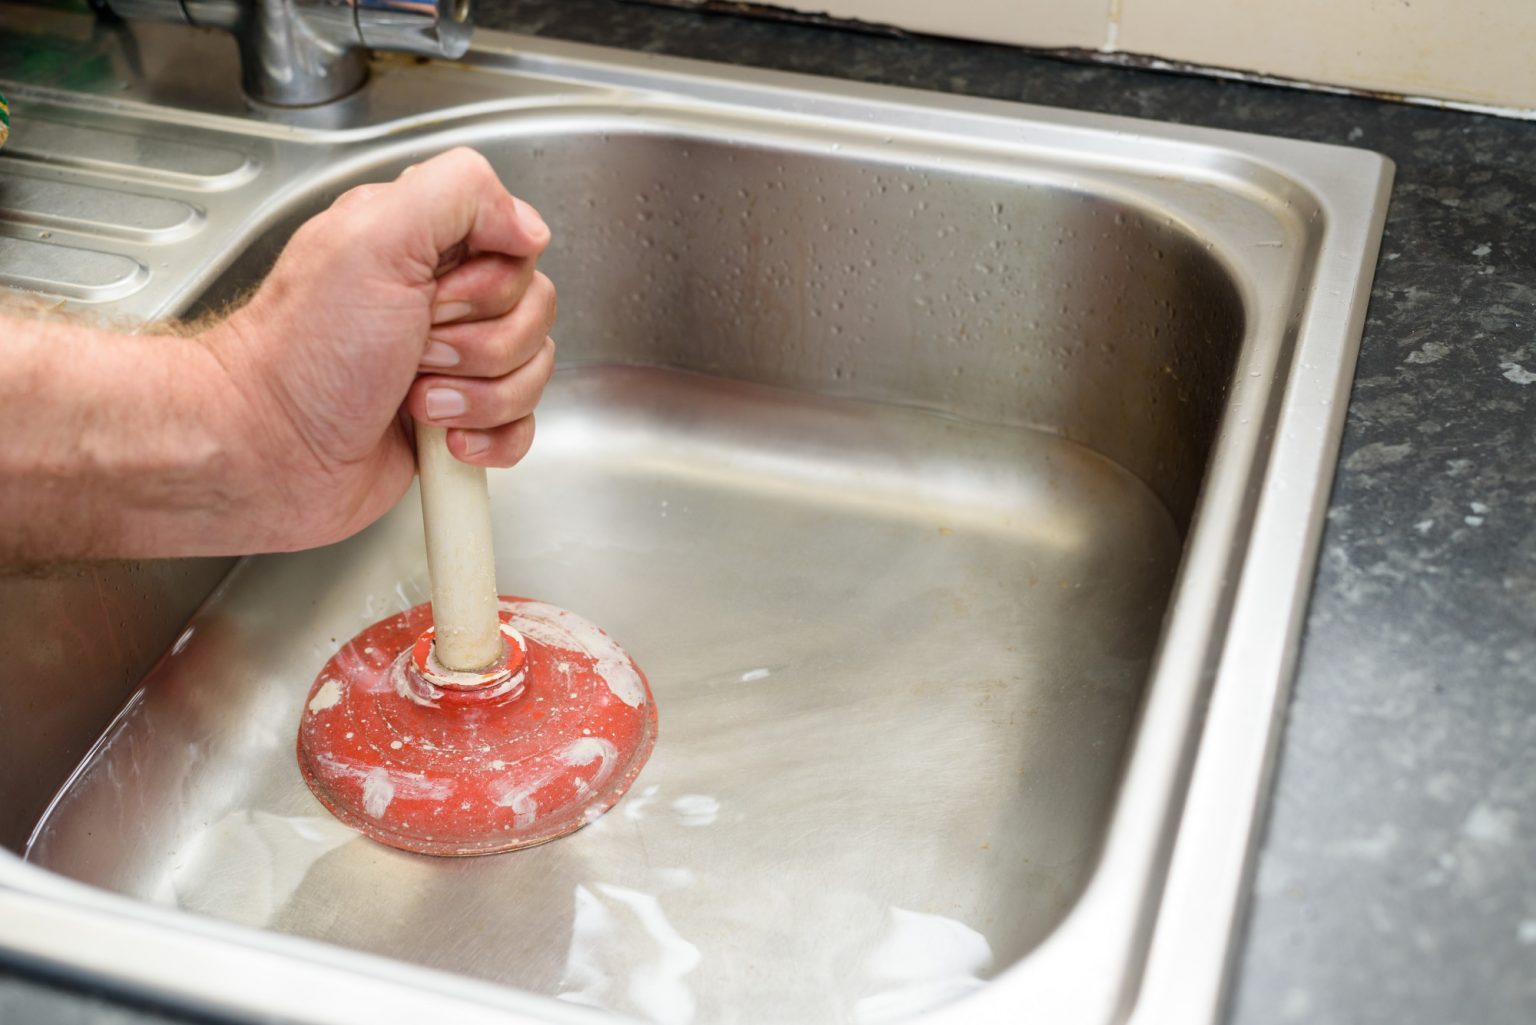 3 Warning Signs Your Kitchen Drain Is Clogged 1536x1025 